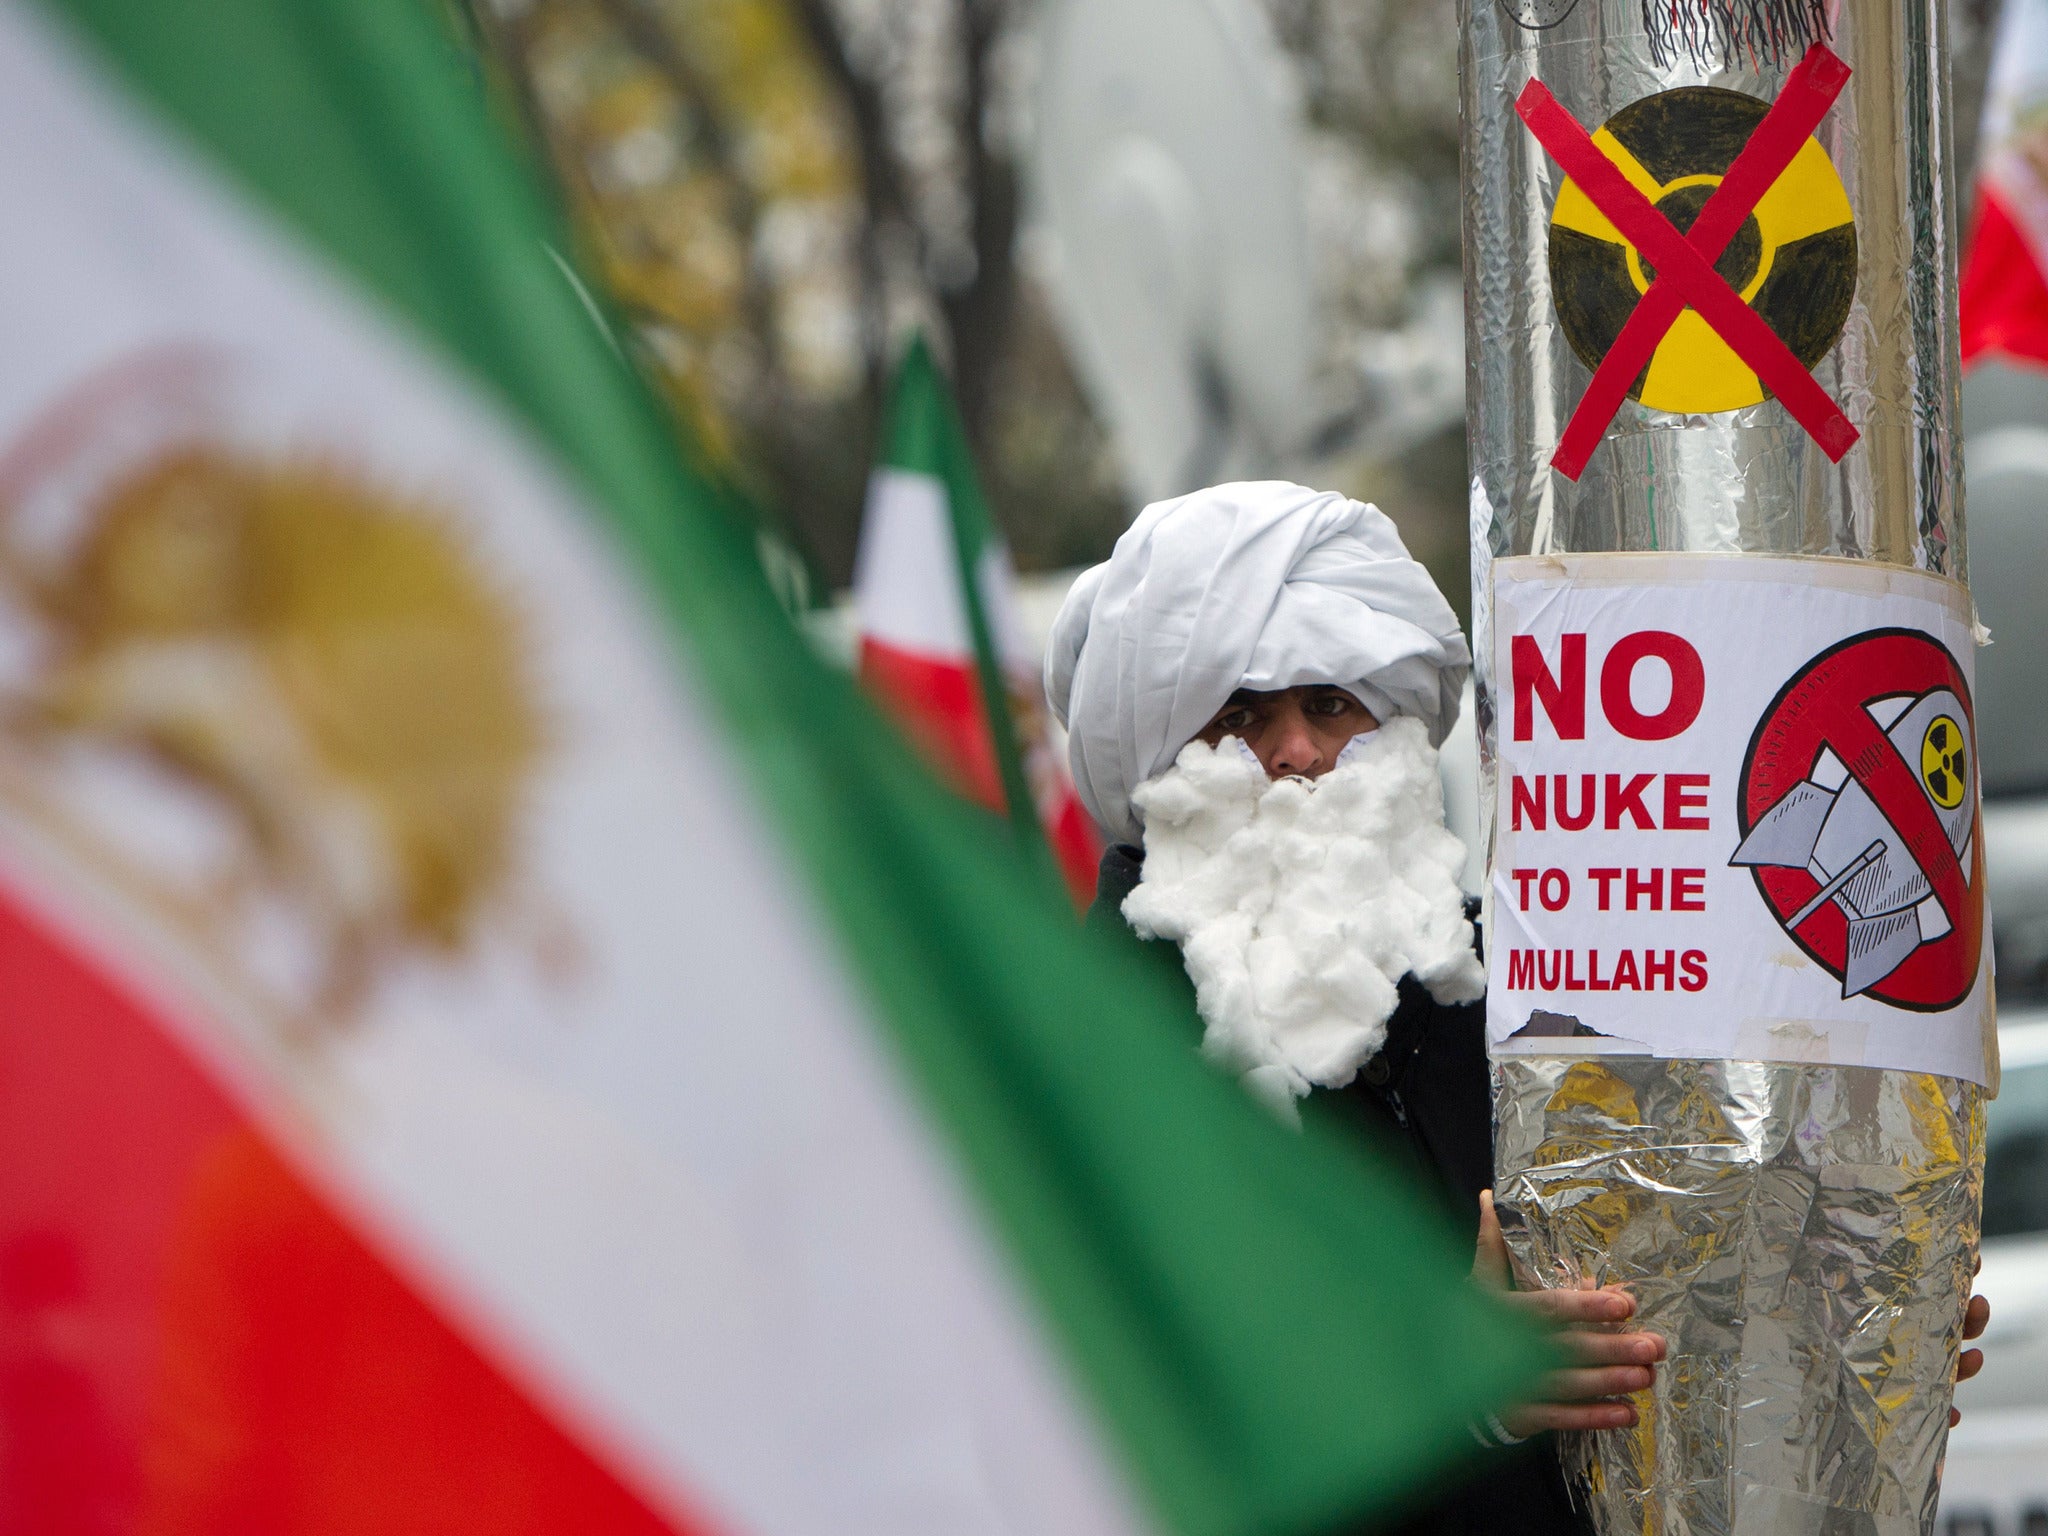 A demonstrator holds a mock-up of a nuclear missile as he protests against Iran's nuclear program and regime in front the Palais Coburg in Vienna